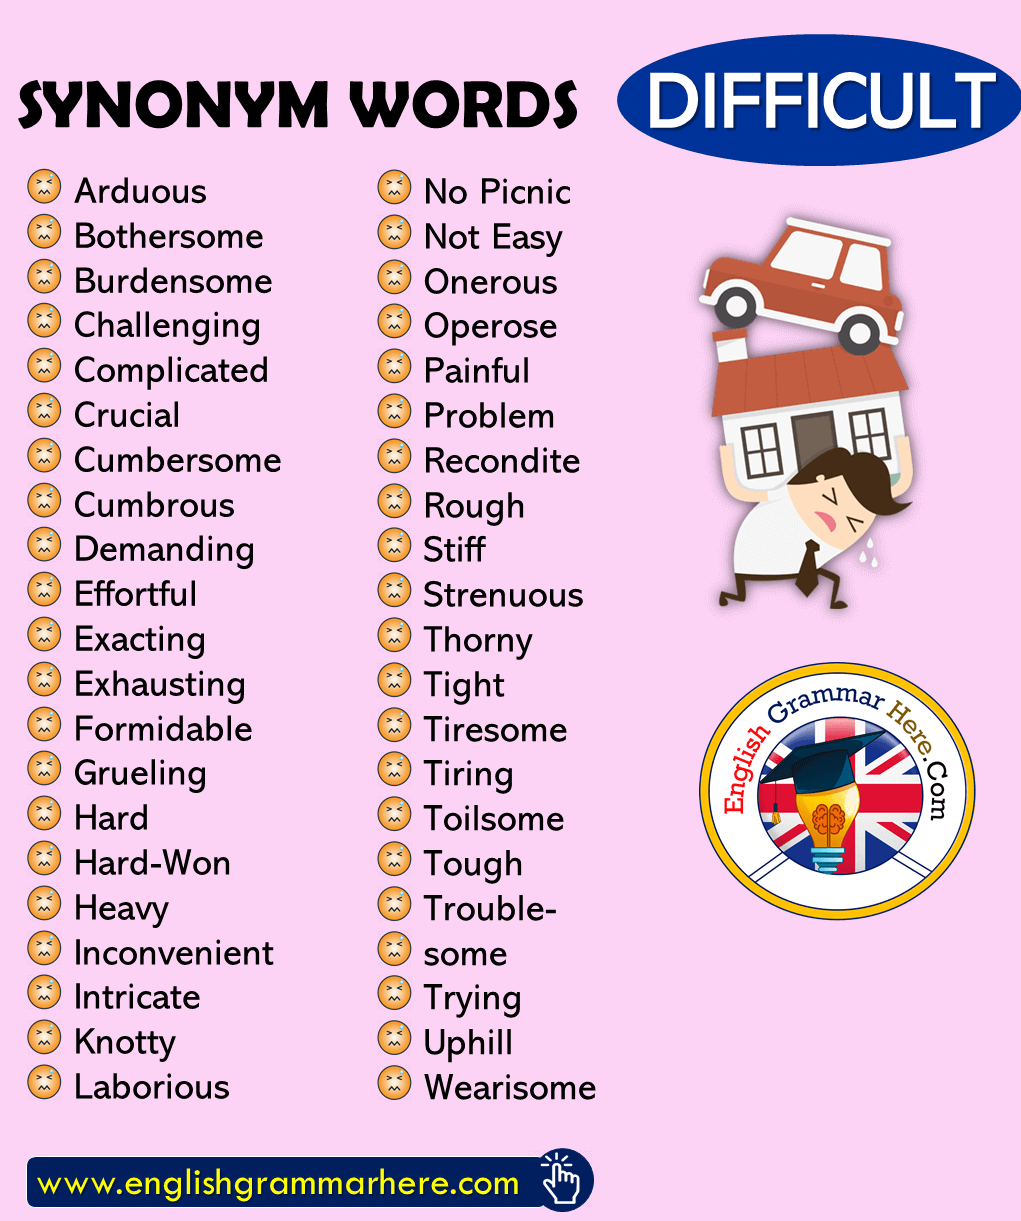 English Synonym Words List with Difficult, Synonym Words – DIFFICULT, English Vocabulary